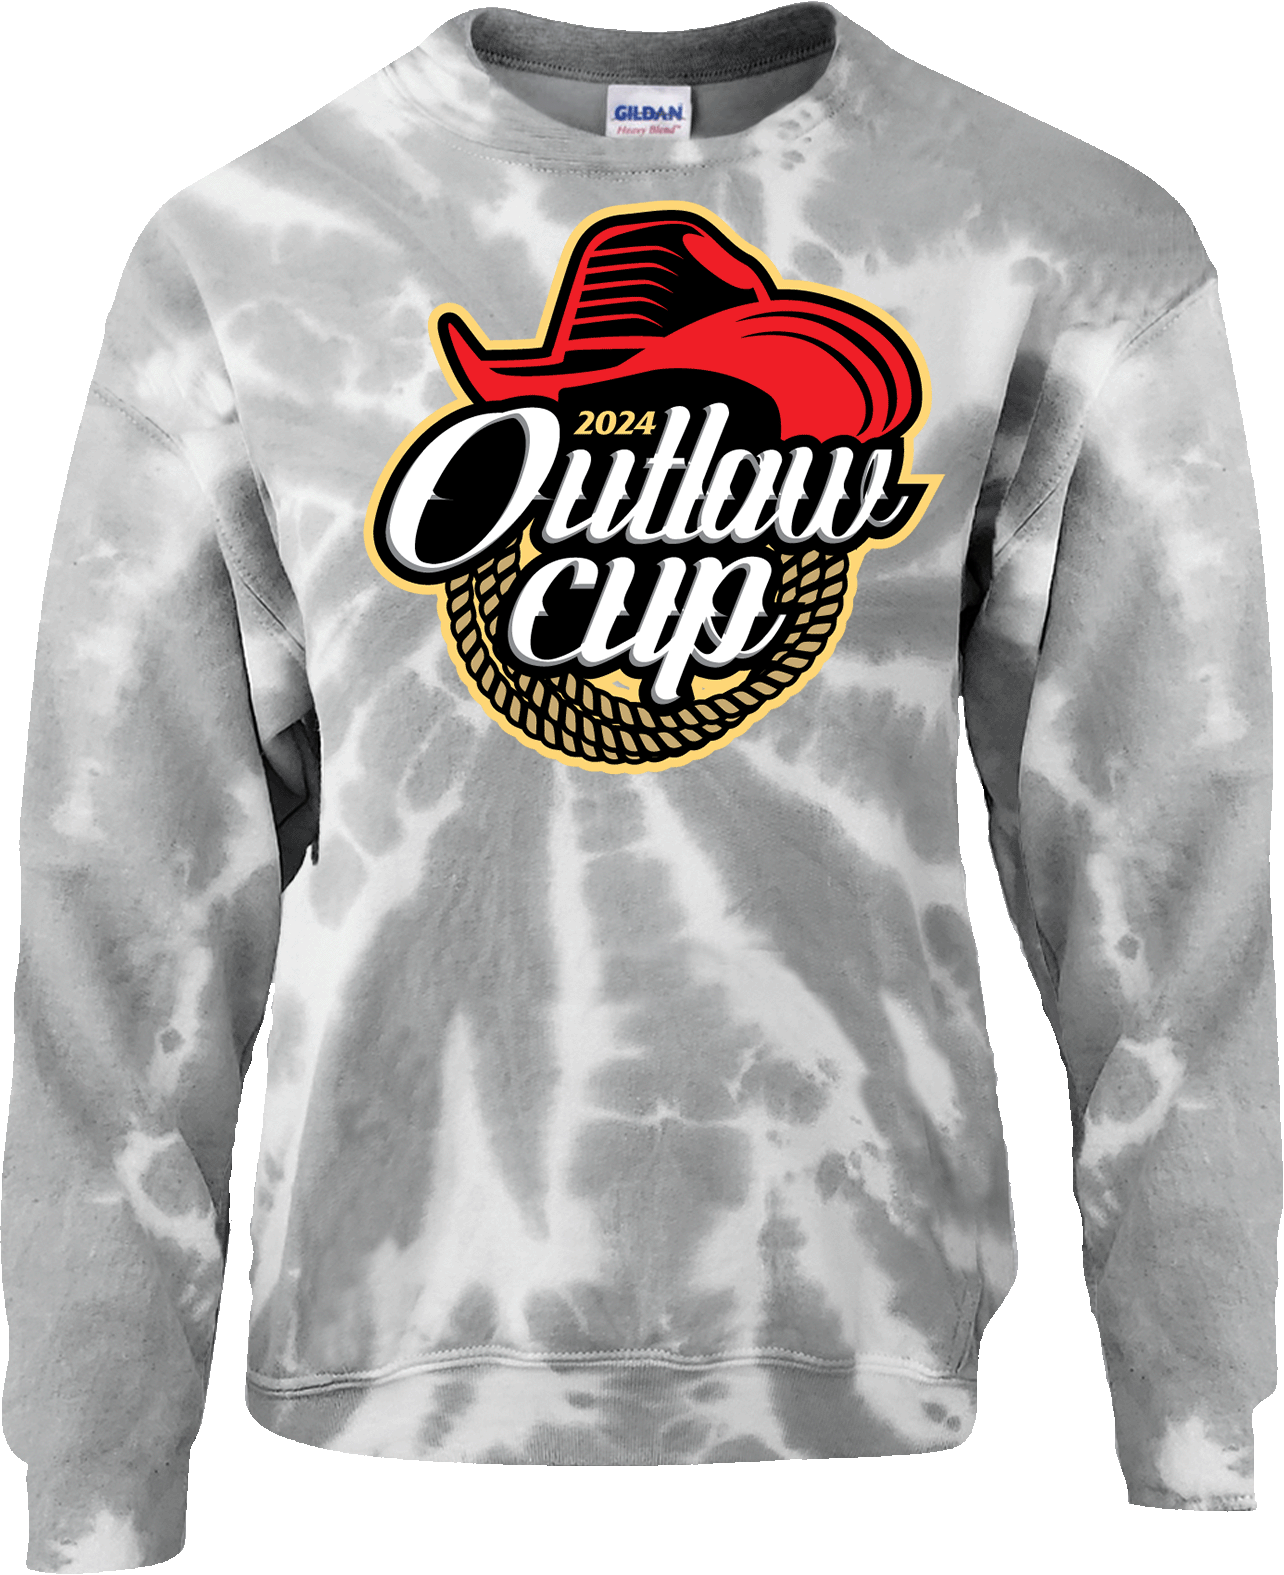 Crew Sweatershirt - 2024 Outlaw Cup